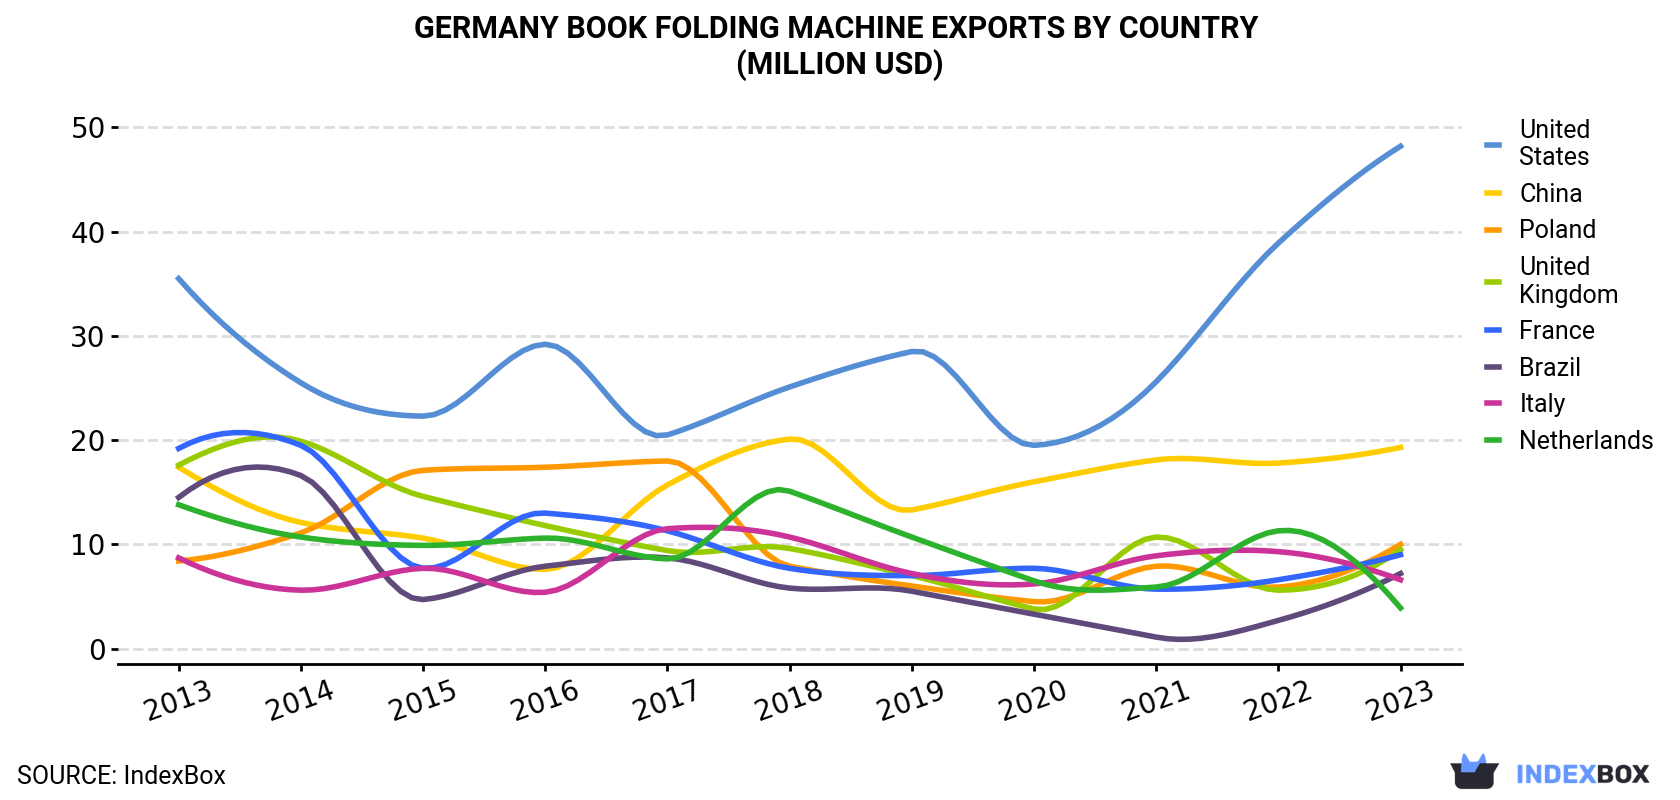 Germany Book Folding Machine Exports By Country (Million USD)